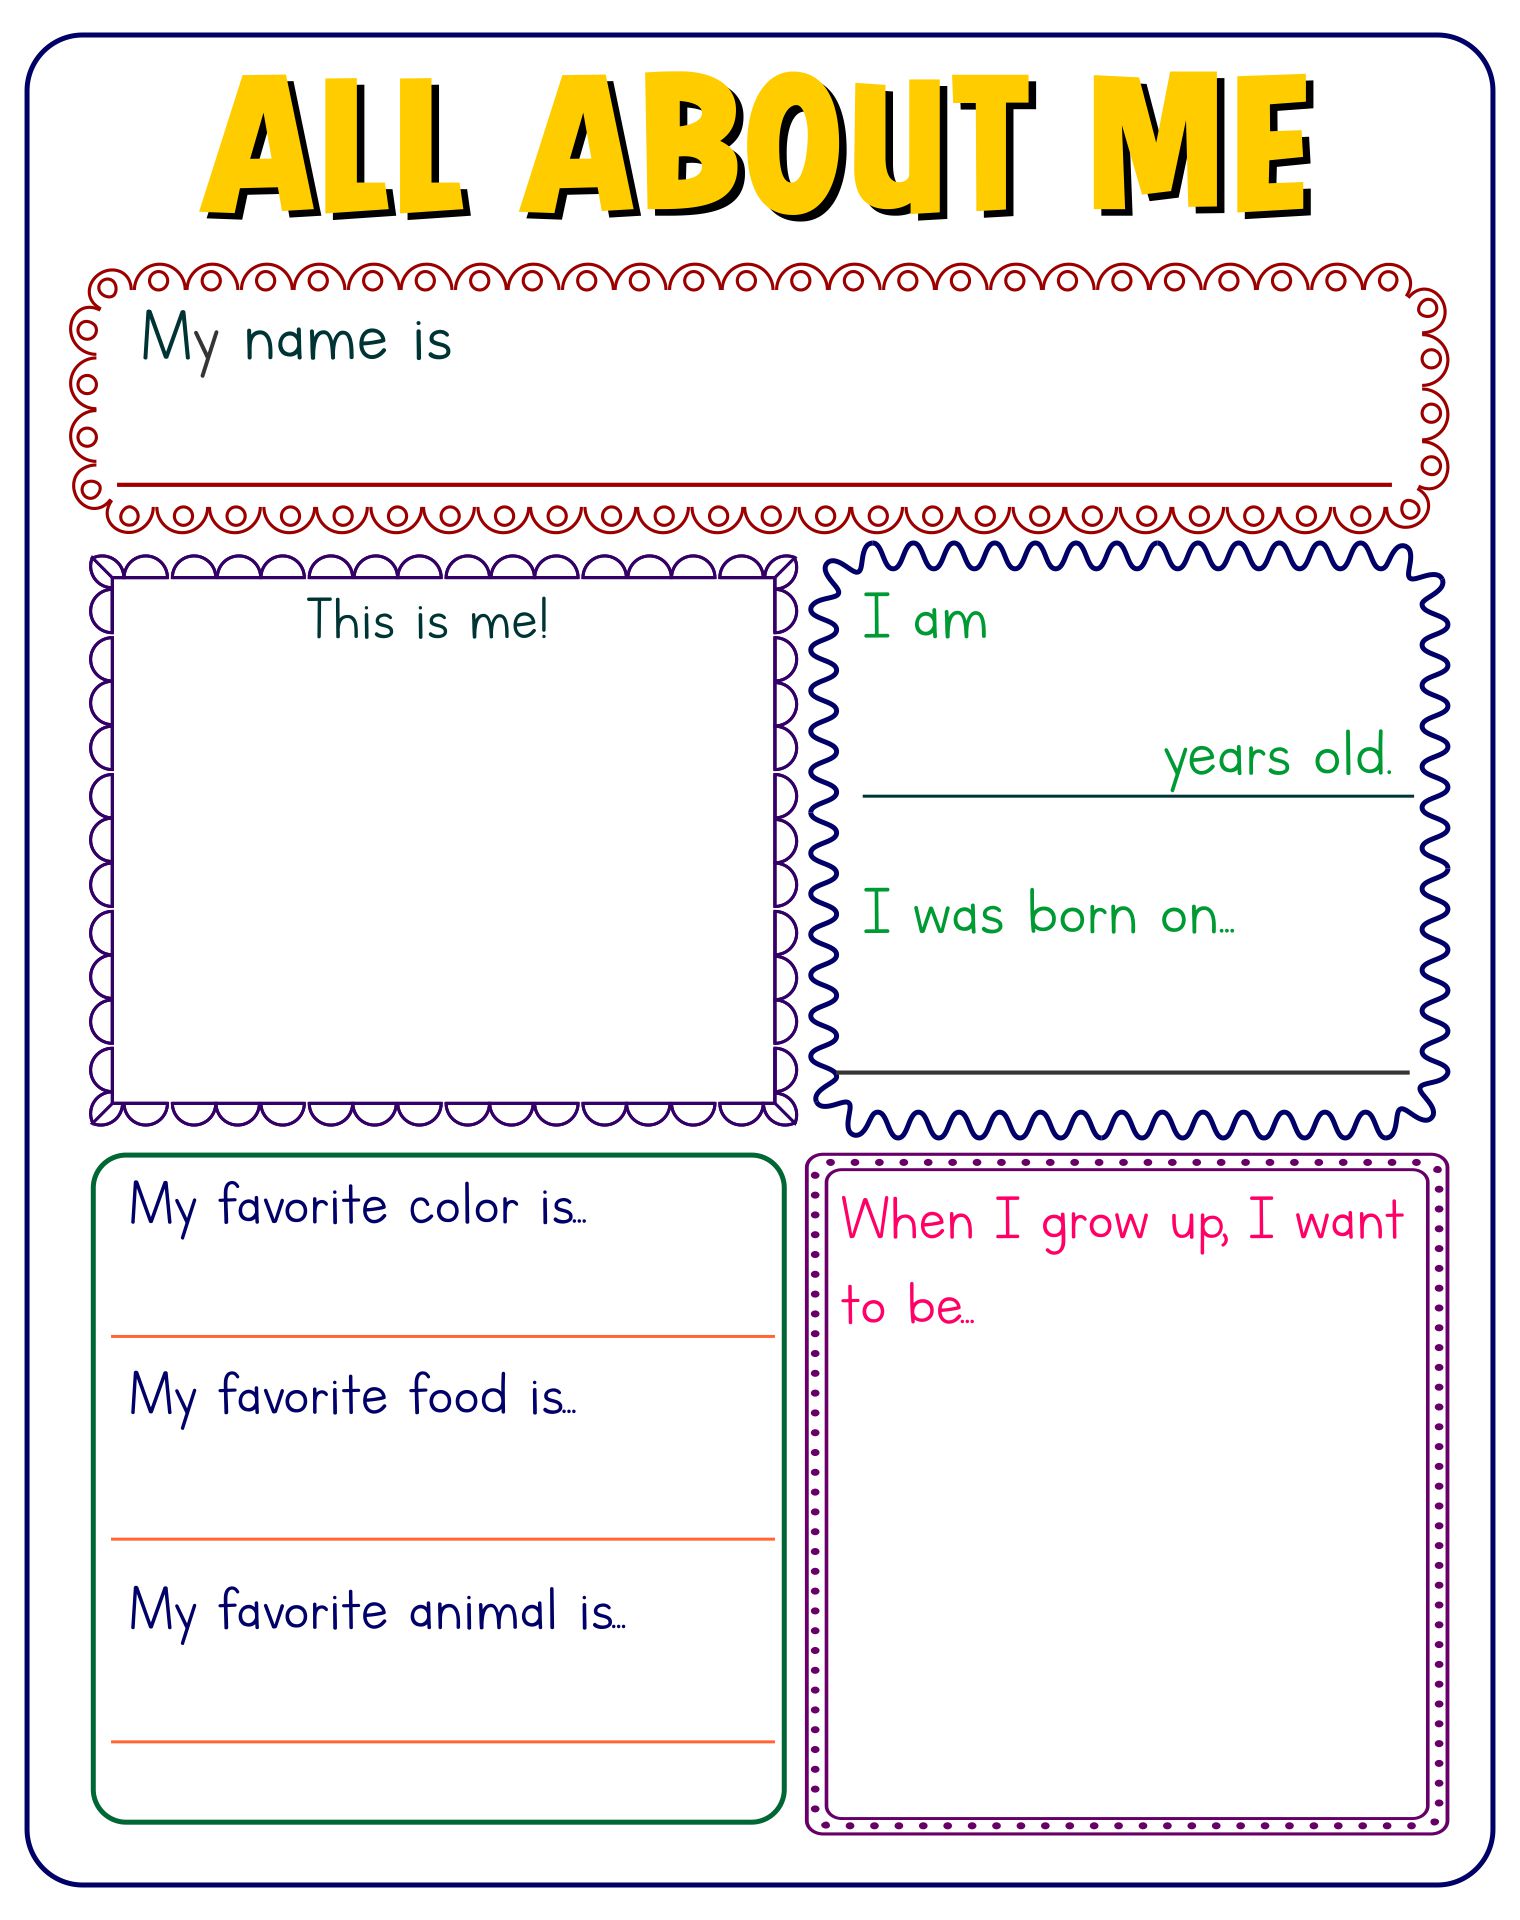 20-best-all-about-me-printable-template-printablee